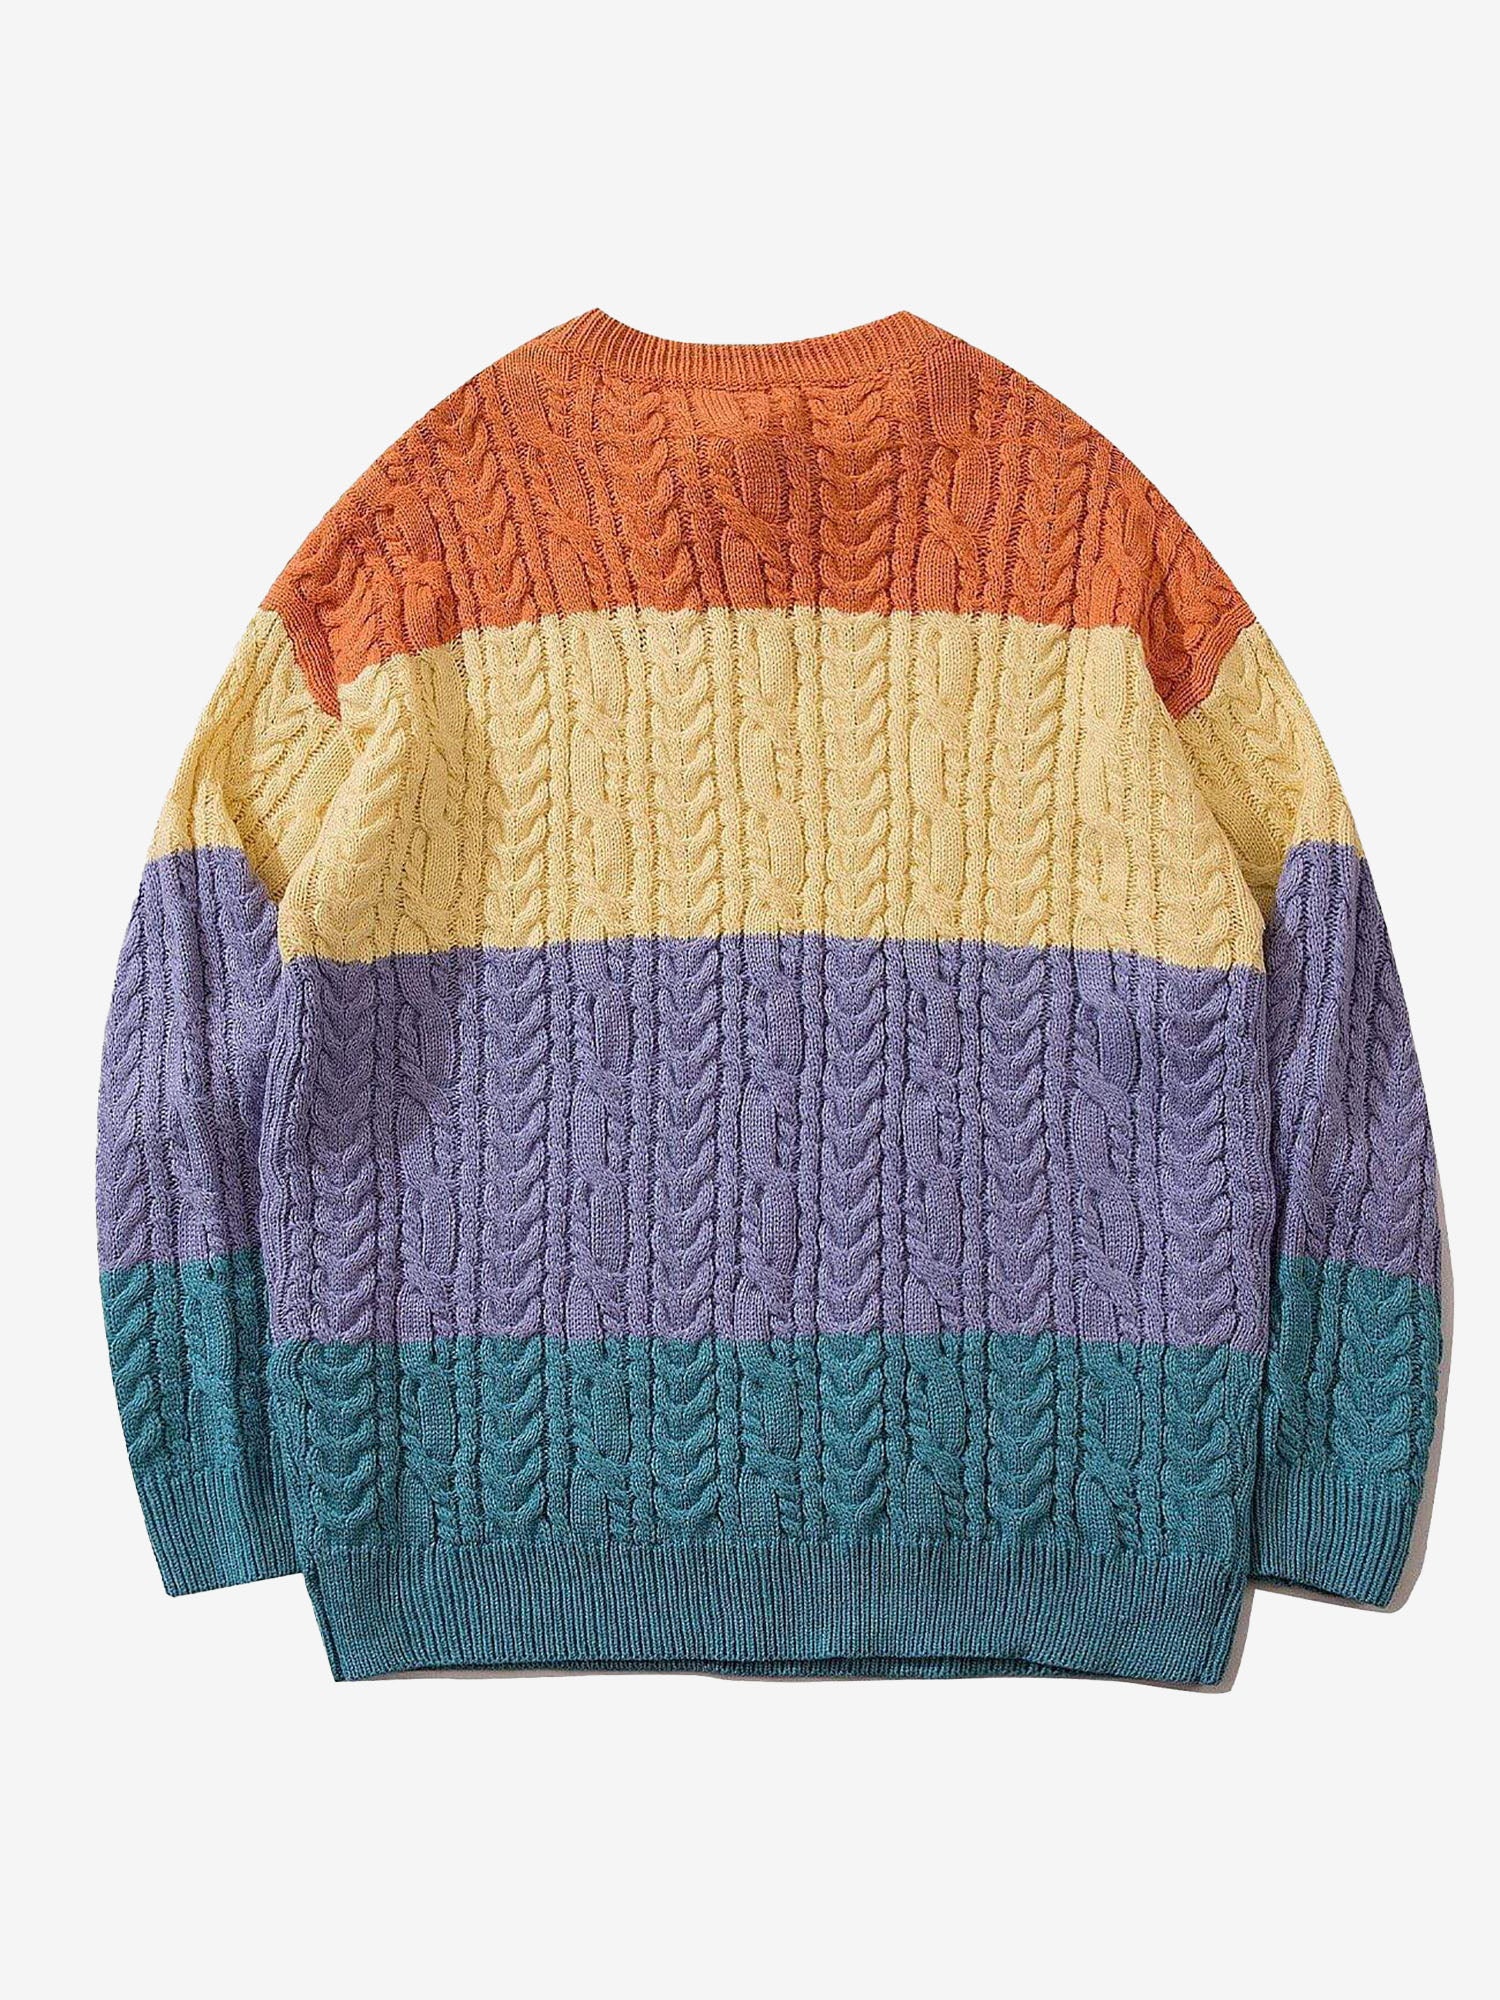 JUSTNOTAG Patchwork Striped Knitted Sweater